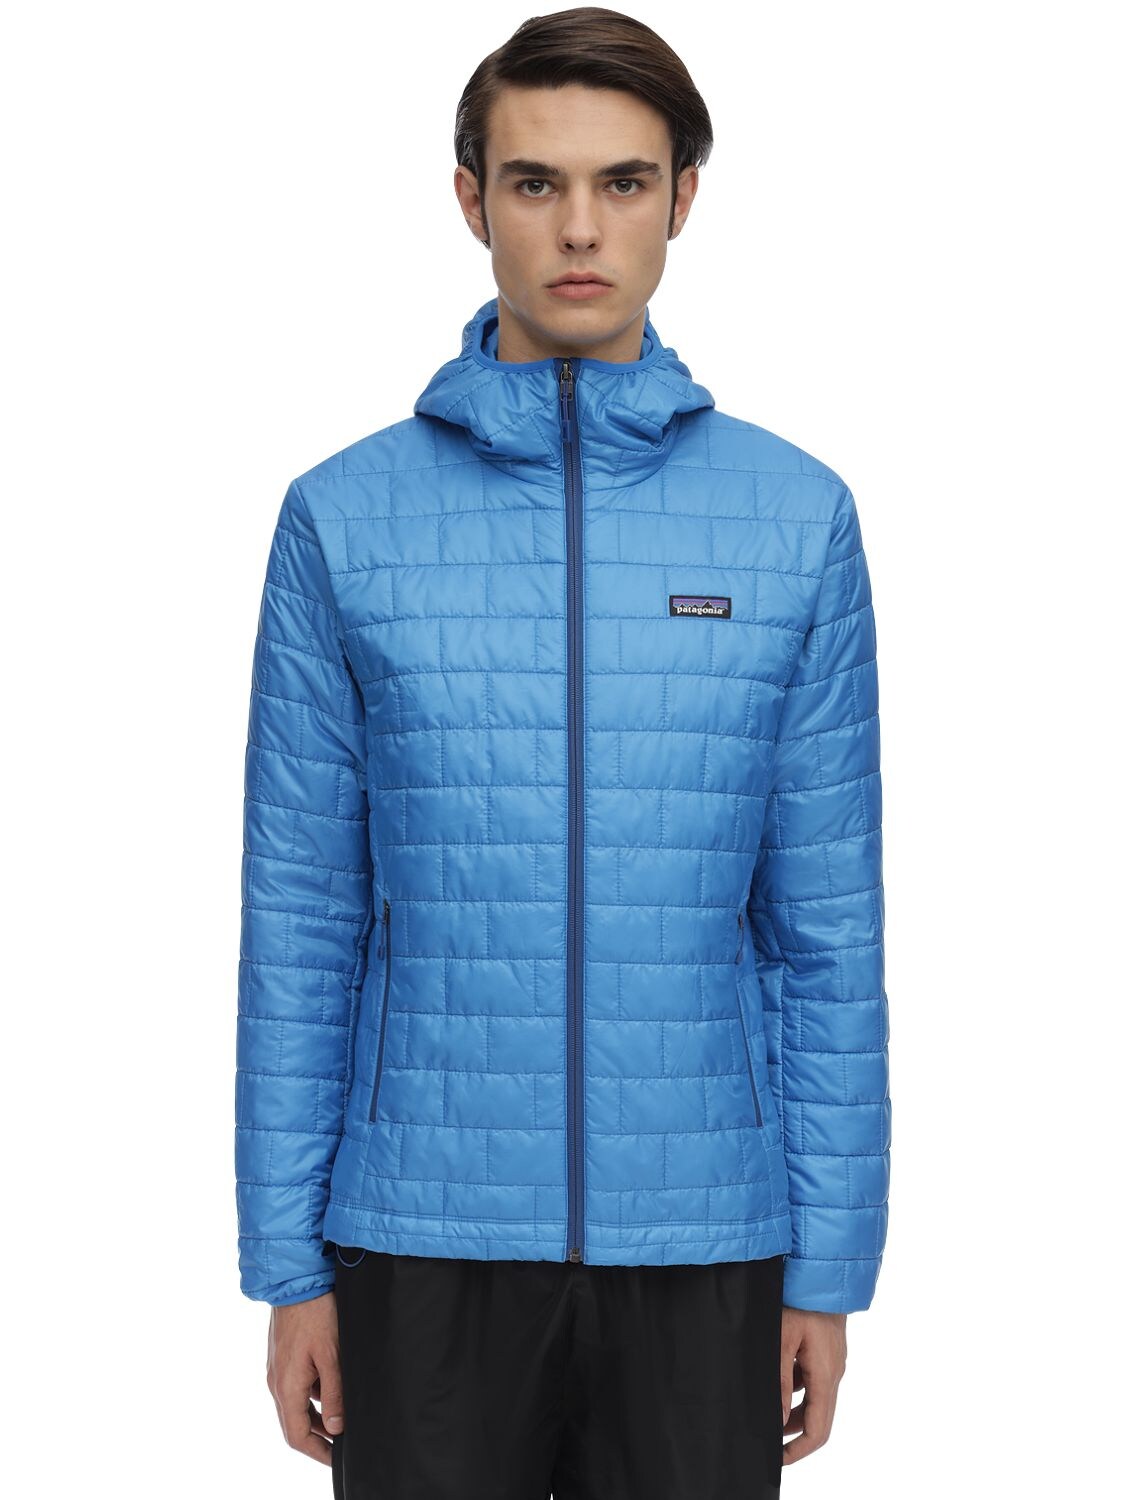 Patagonia Nano Puffer Jacket In Andes Blue